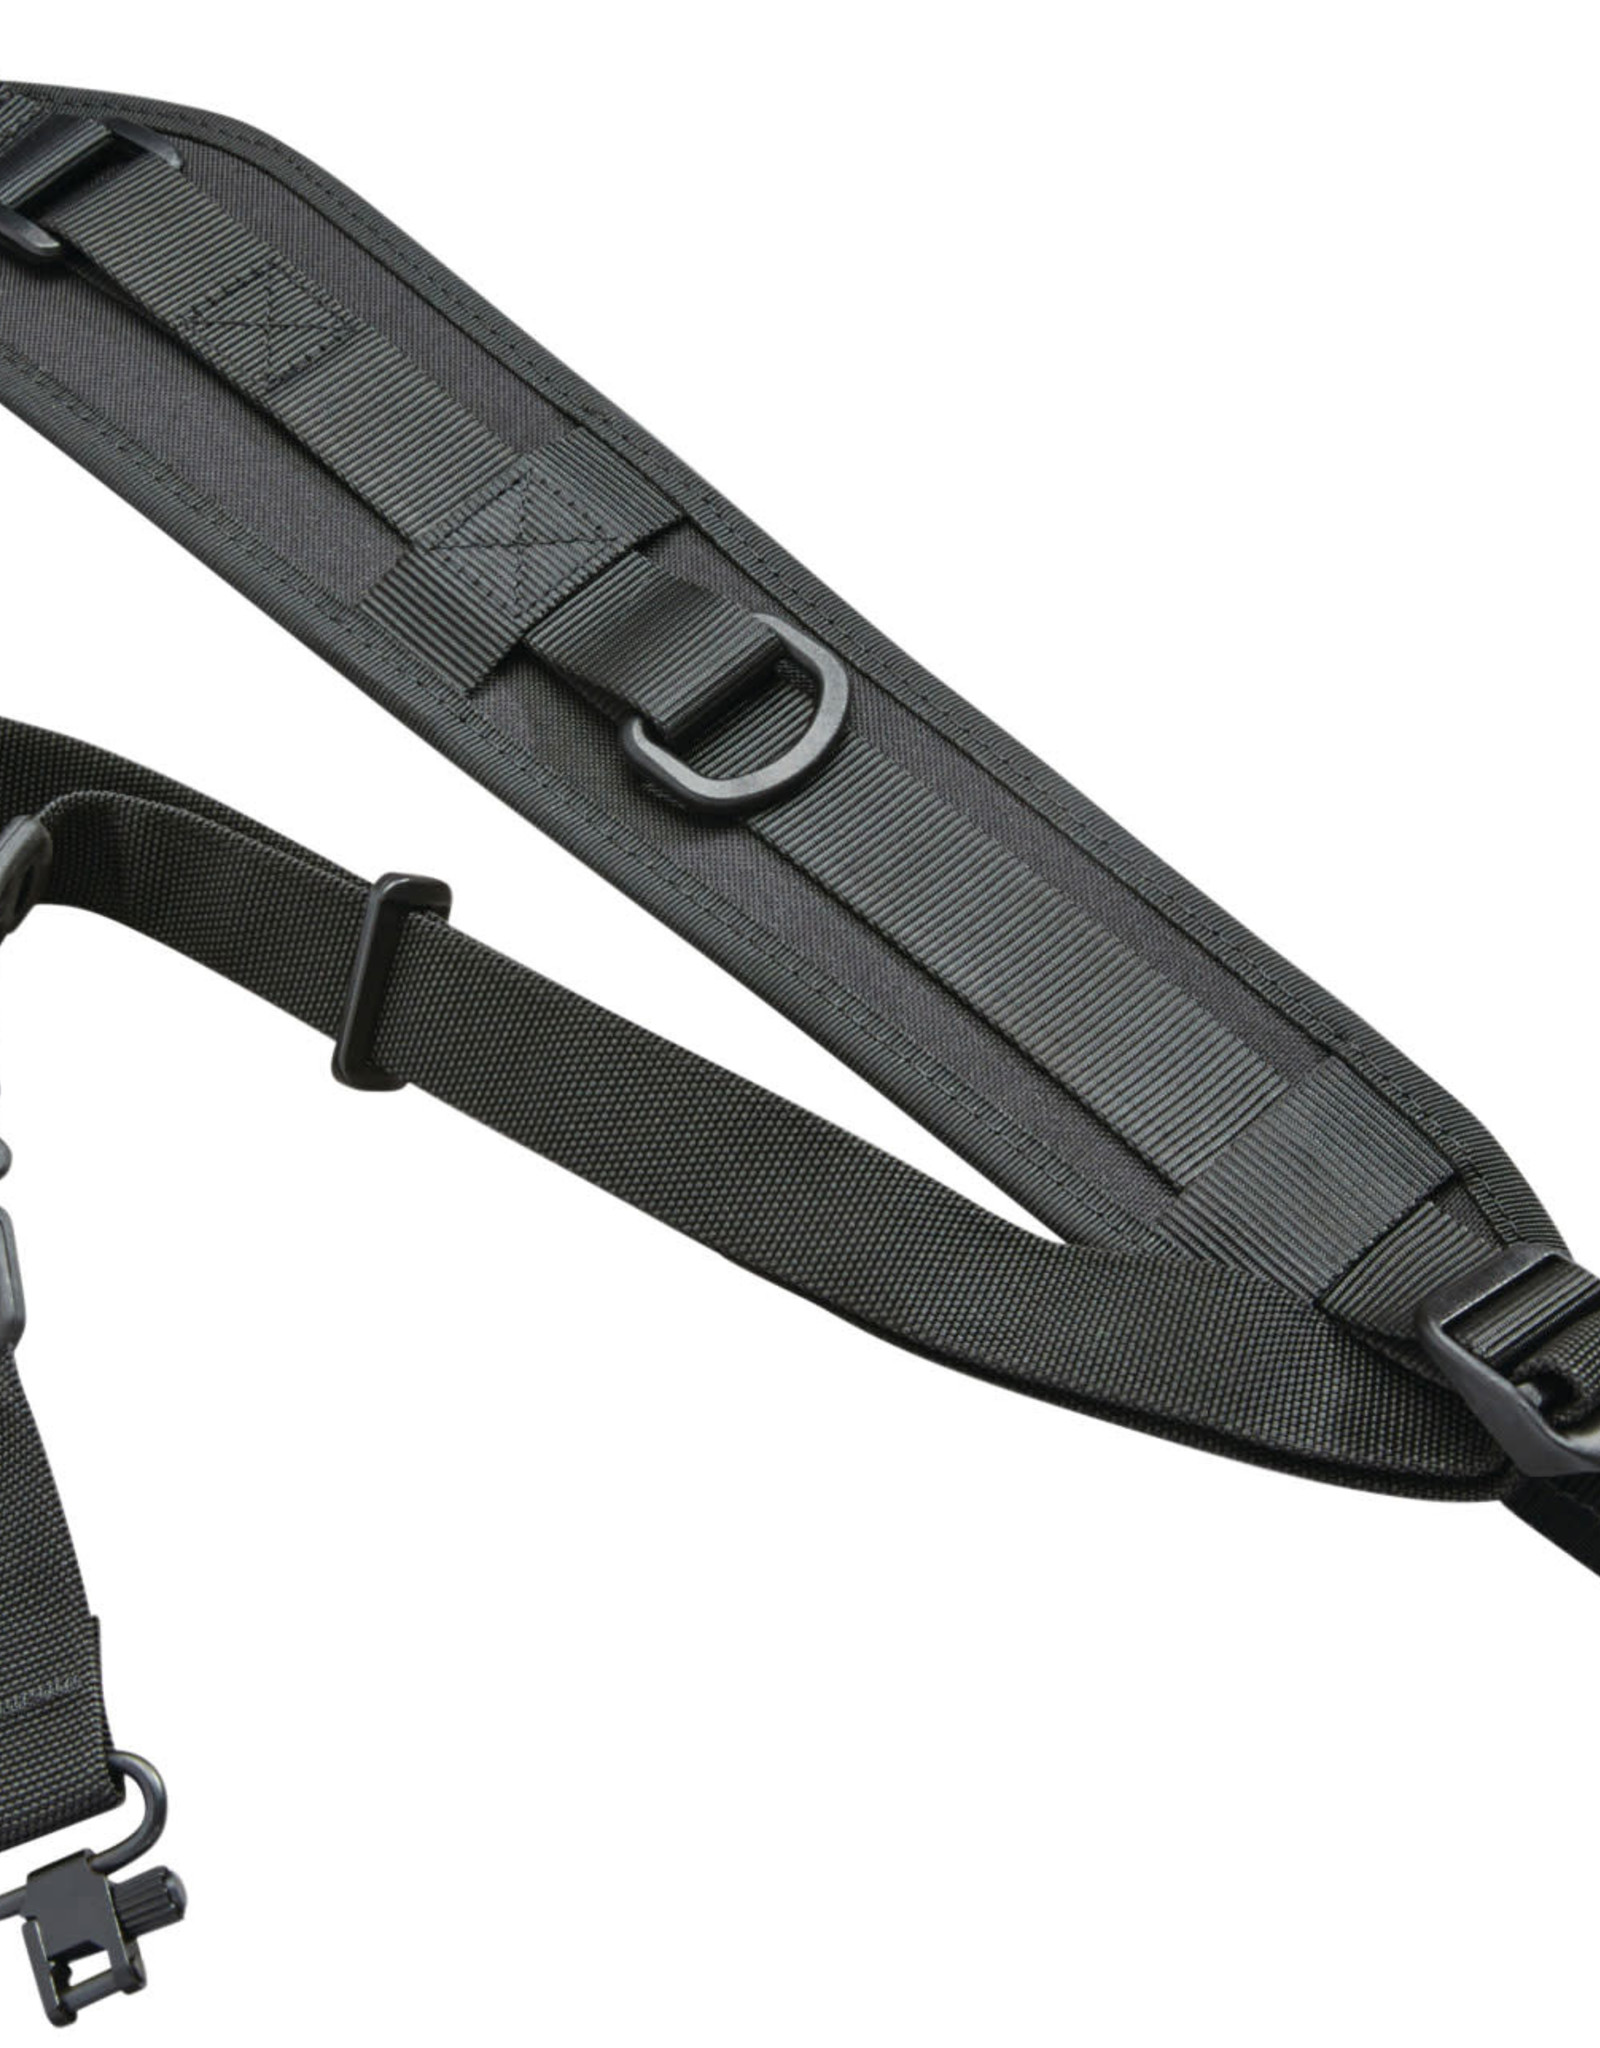 Butler Creek Quick Carry Sling With Swivels